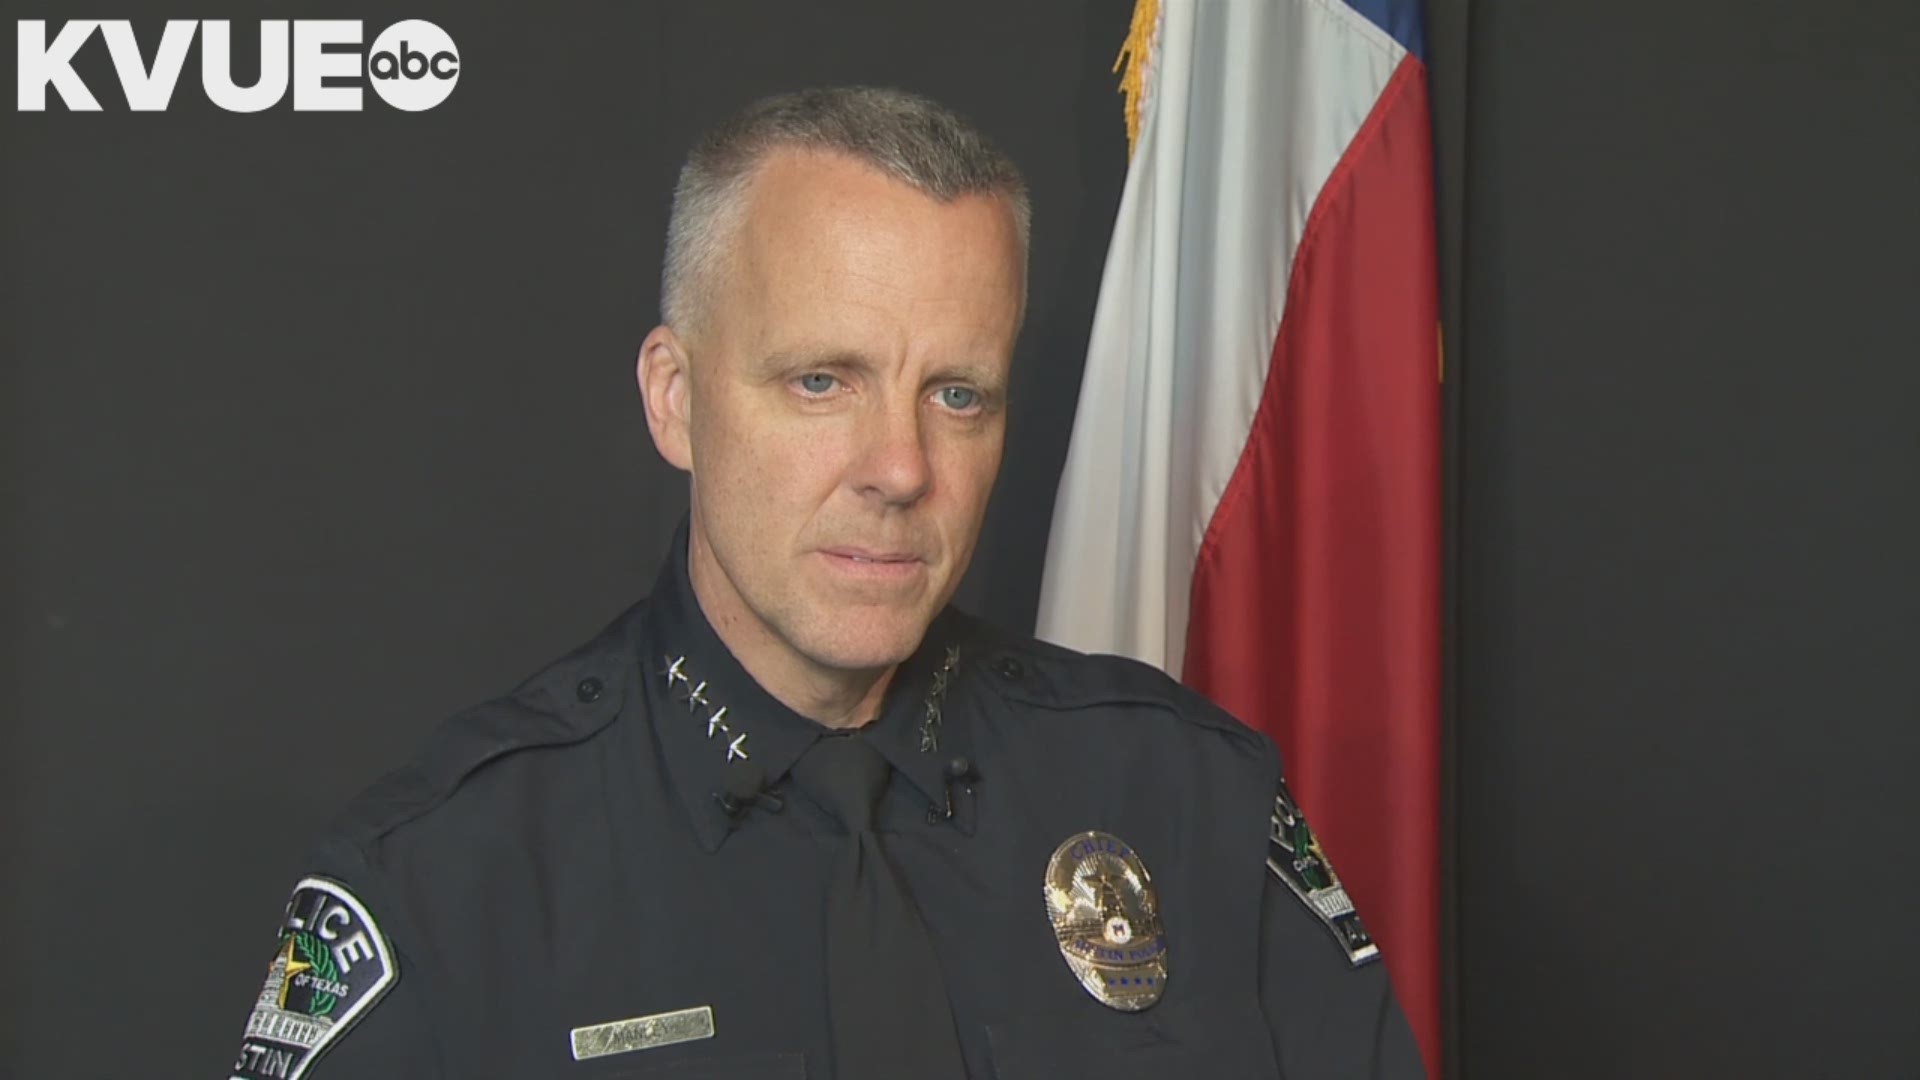 Some Austin police cadets allege a culture of abuse toward citizens during training. The department and Interim Police Chief Brian Manley deny their allegations.